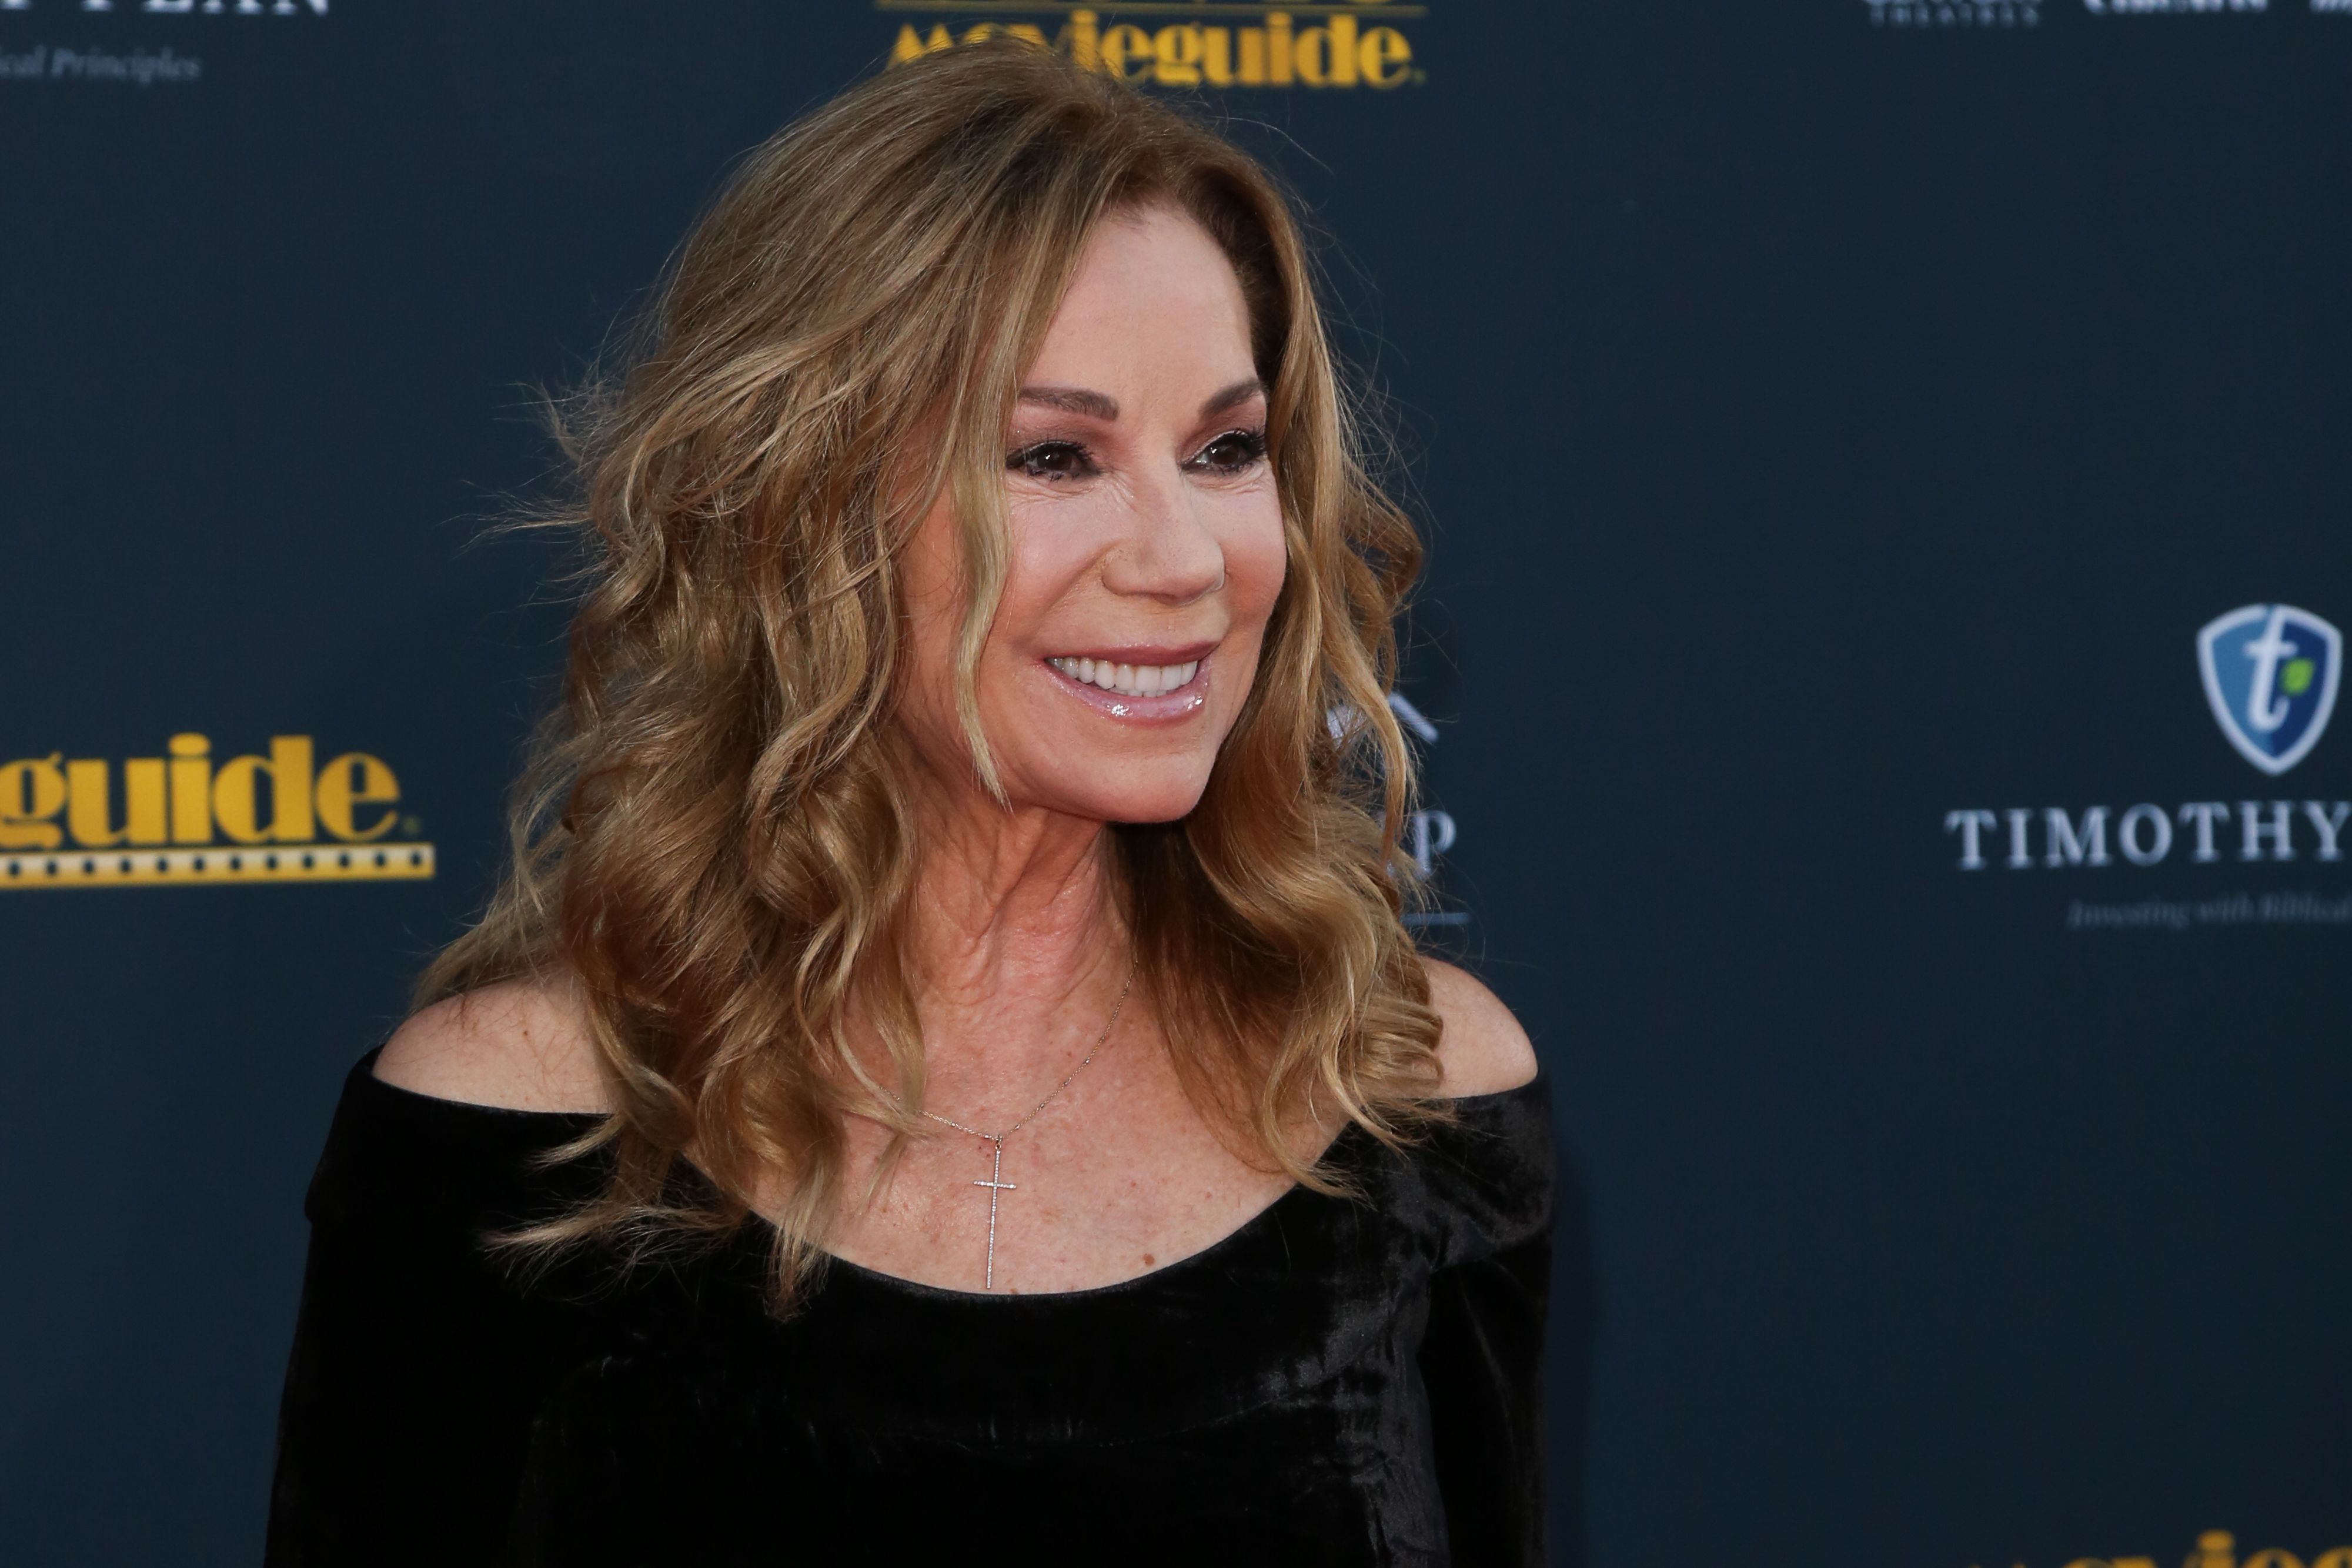 Kathie Lee Gifford at the 28th Annual Movieguide Awards Gala in January 2020 in Los Angeles | Source: Getty Images